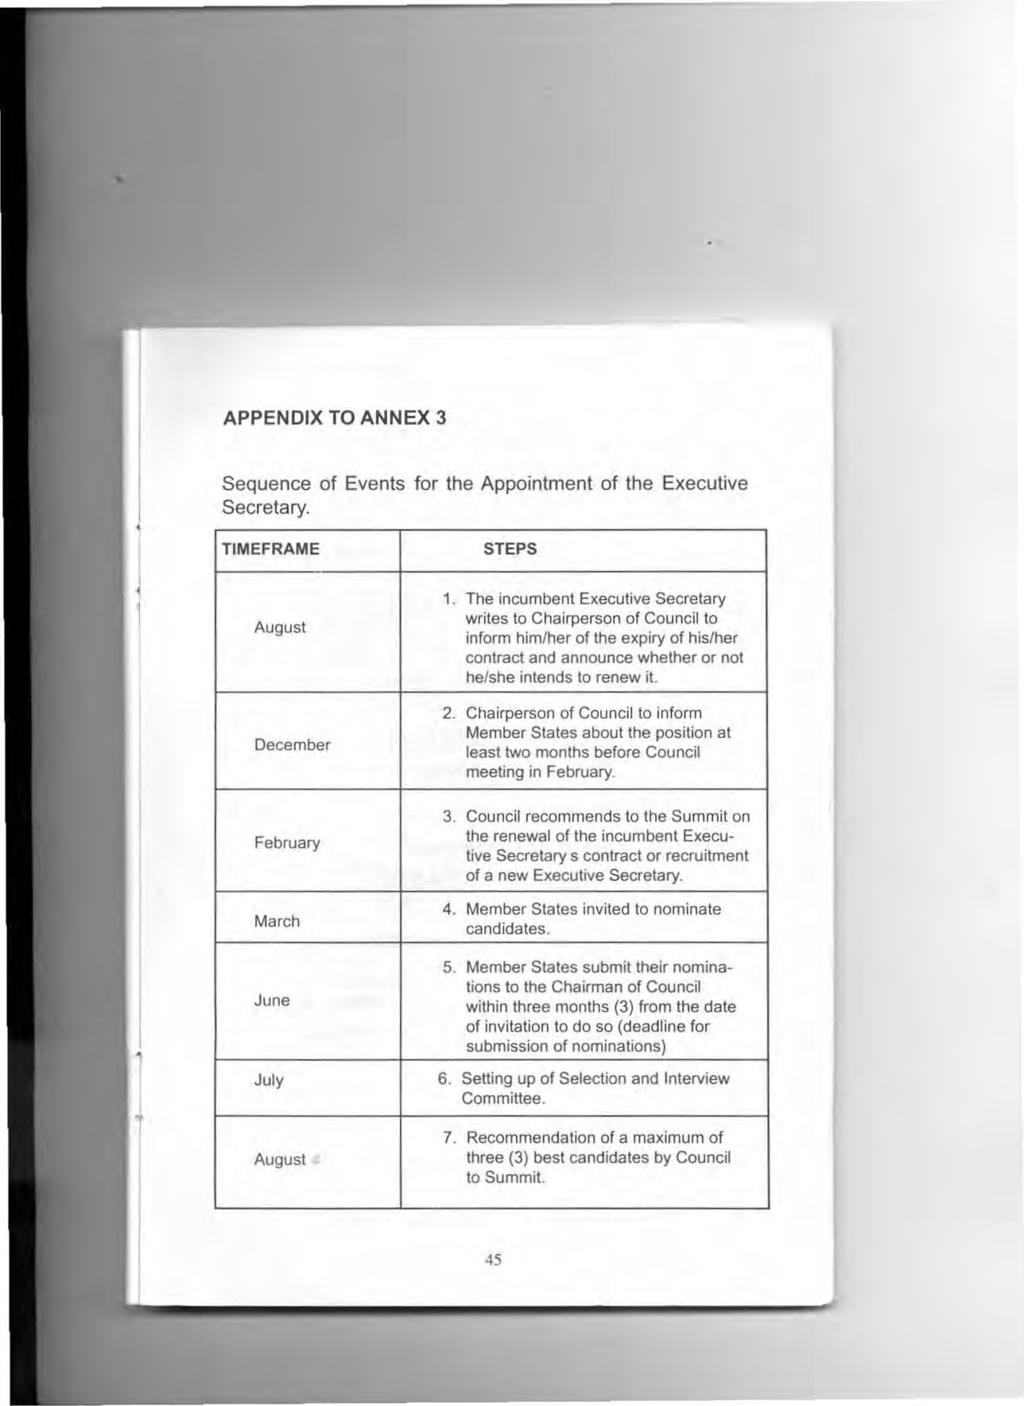 APPENDIX TO ANNEX 3 Sequence of Events for the Appointment of the Executive Secretary. TIMEFRAME STEPS I, 1 August 1.